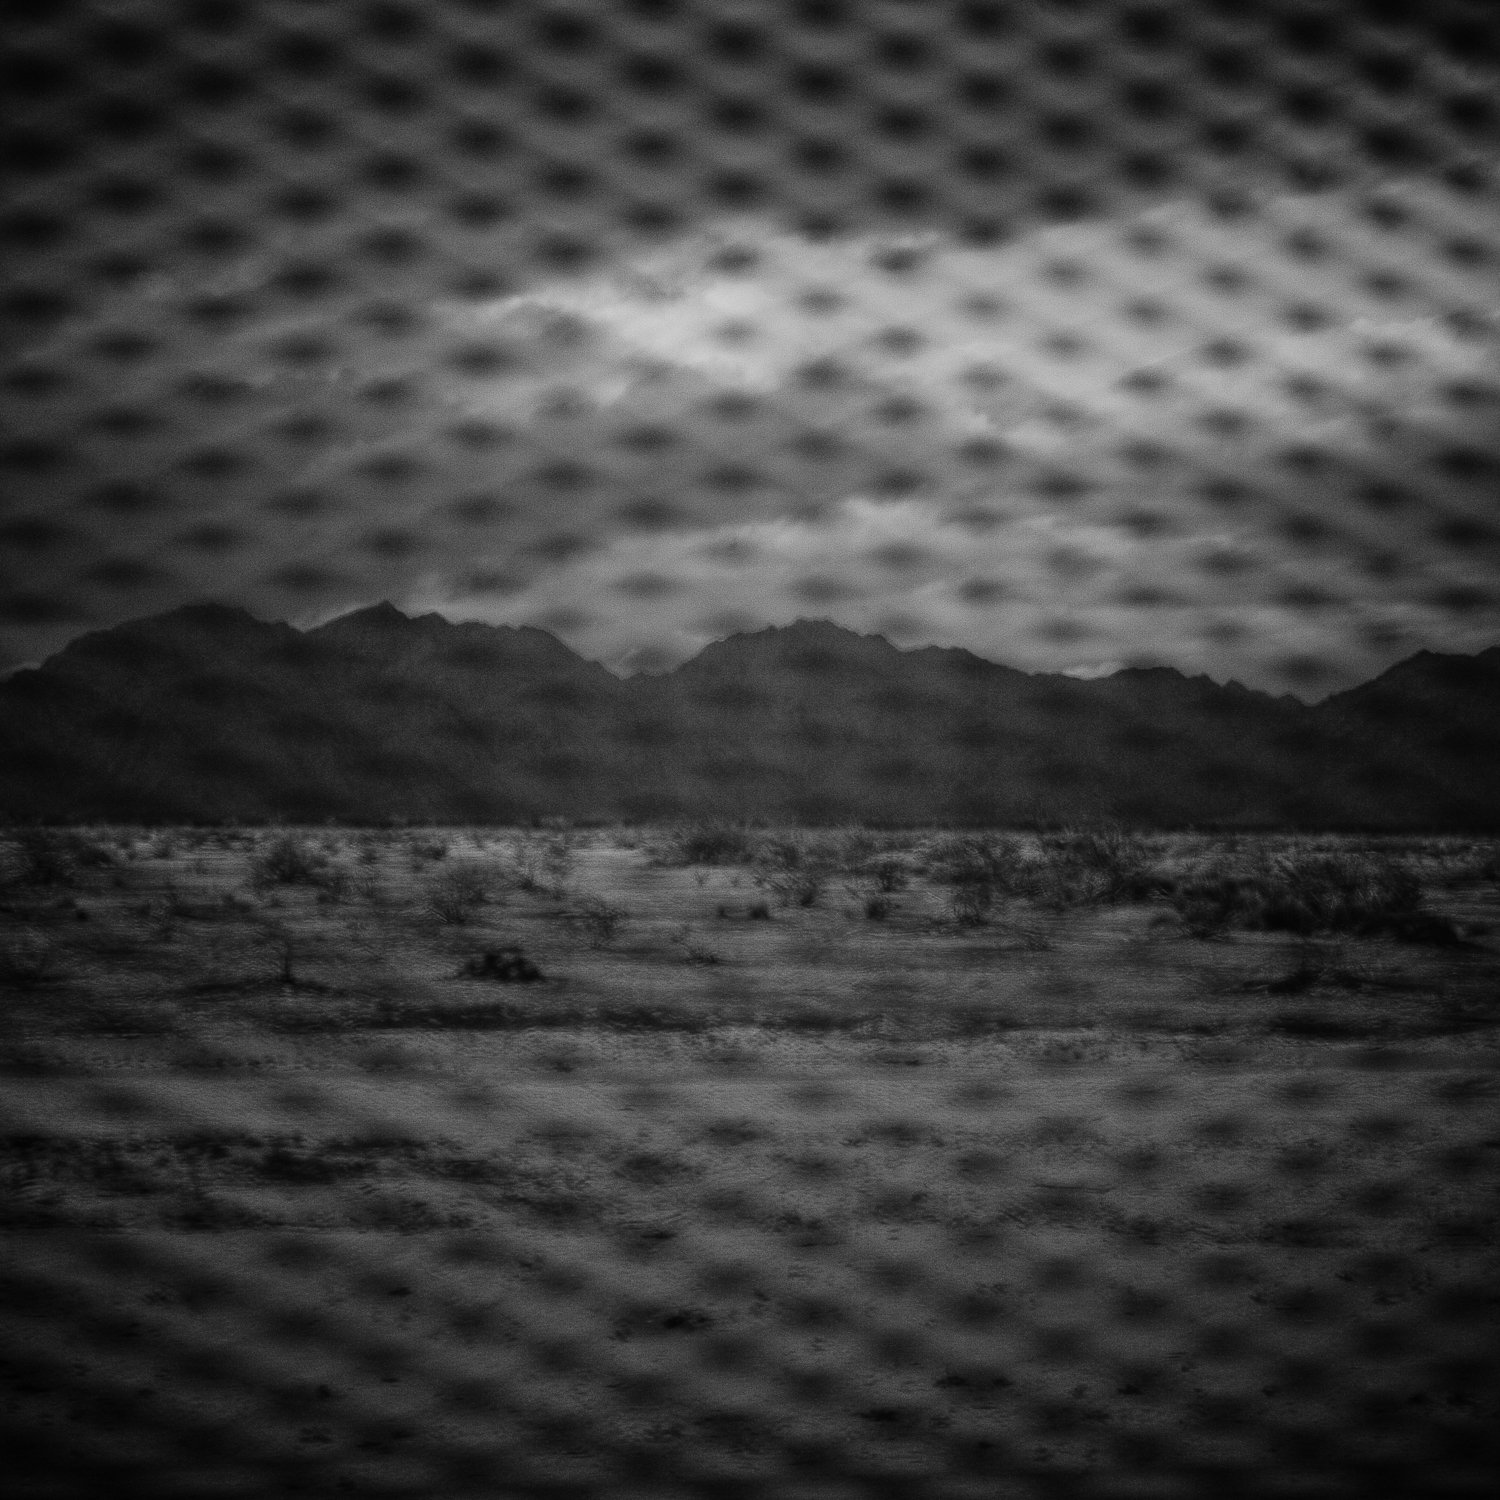  Mountains in the United States are seen from the Sonoran Desert in Mexico through the fence marking the border between the two countries. 